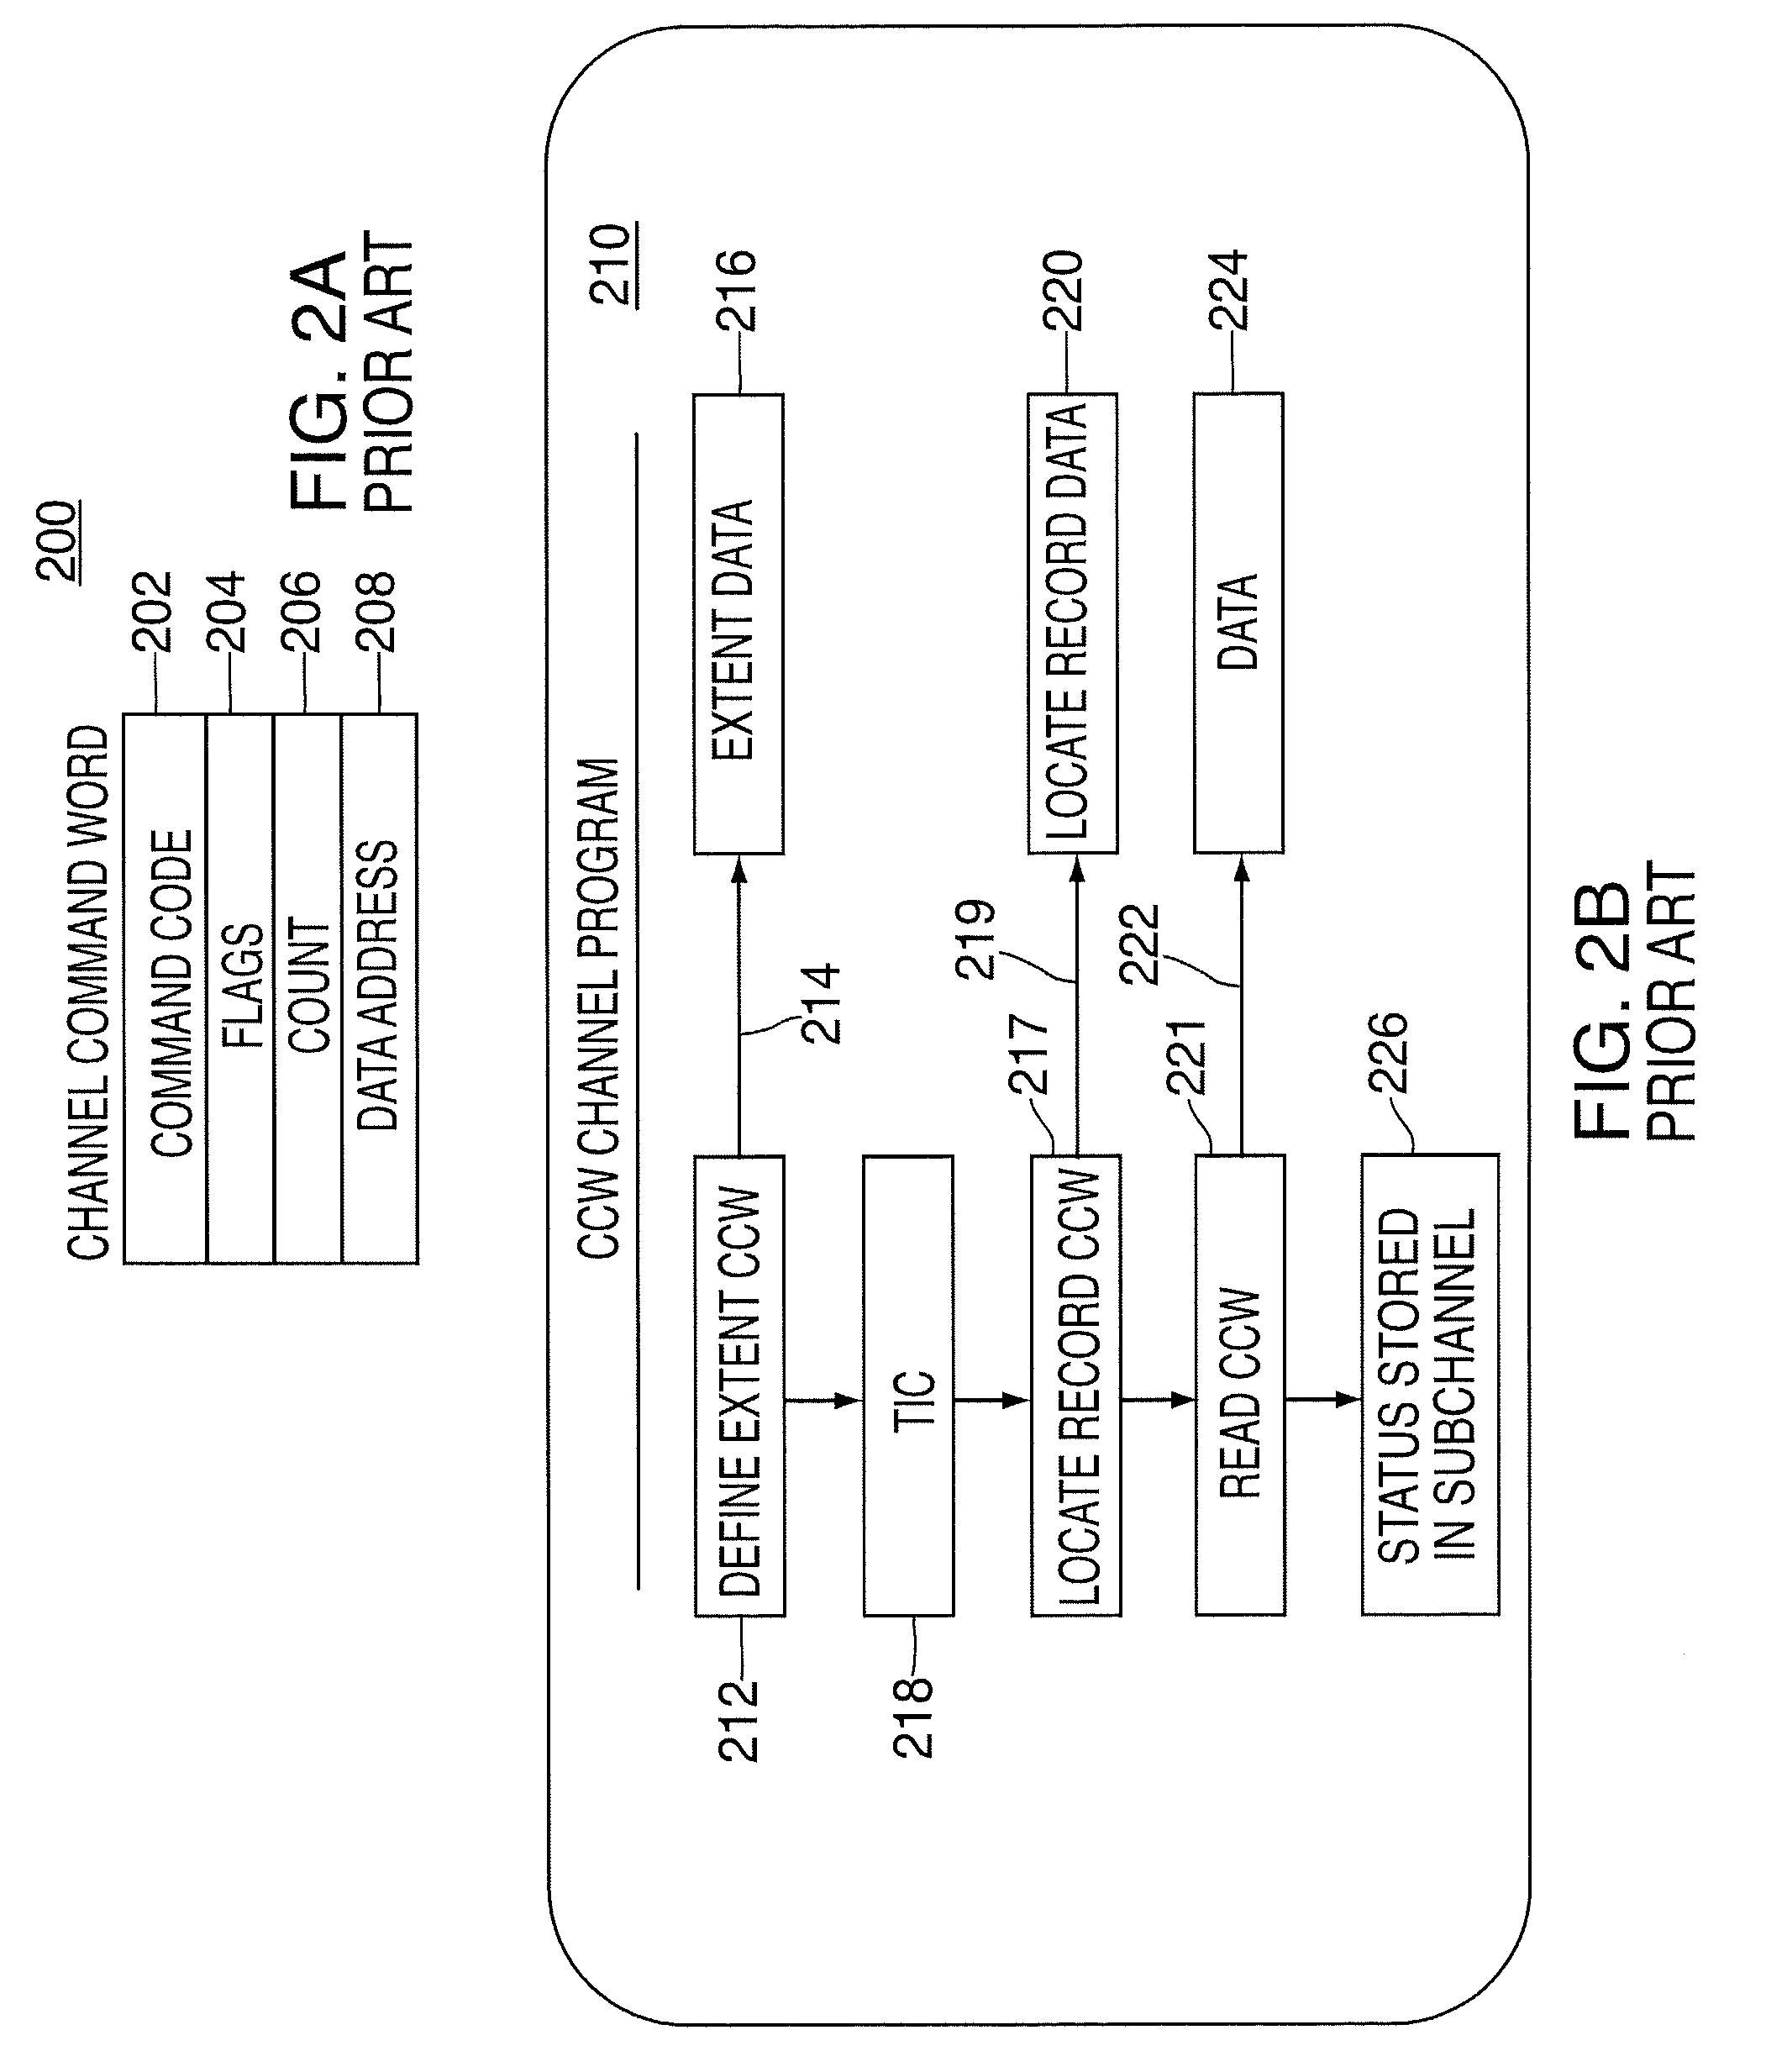 Processing of data to determine compatability in an input/output processing system